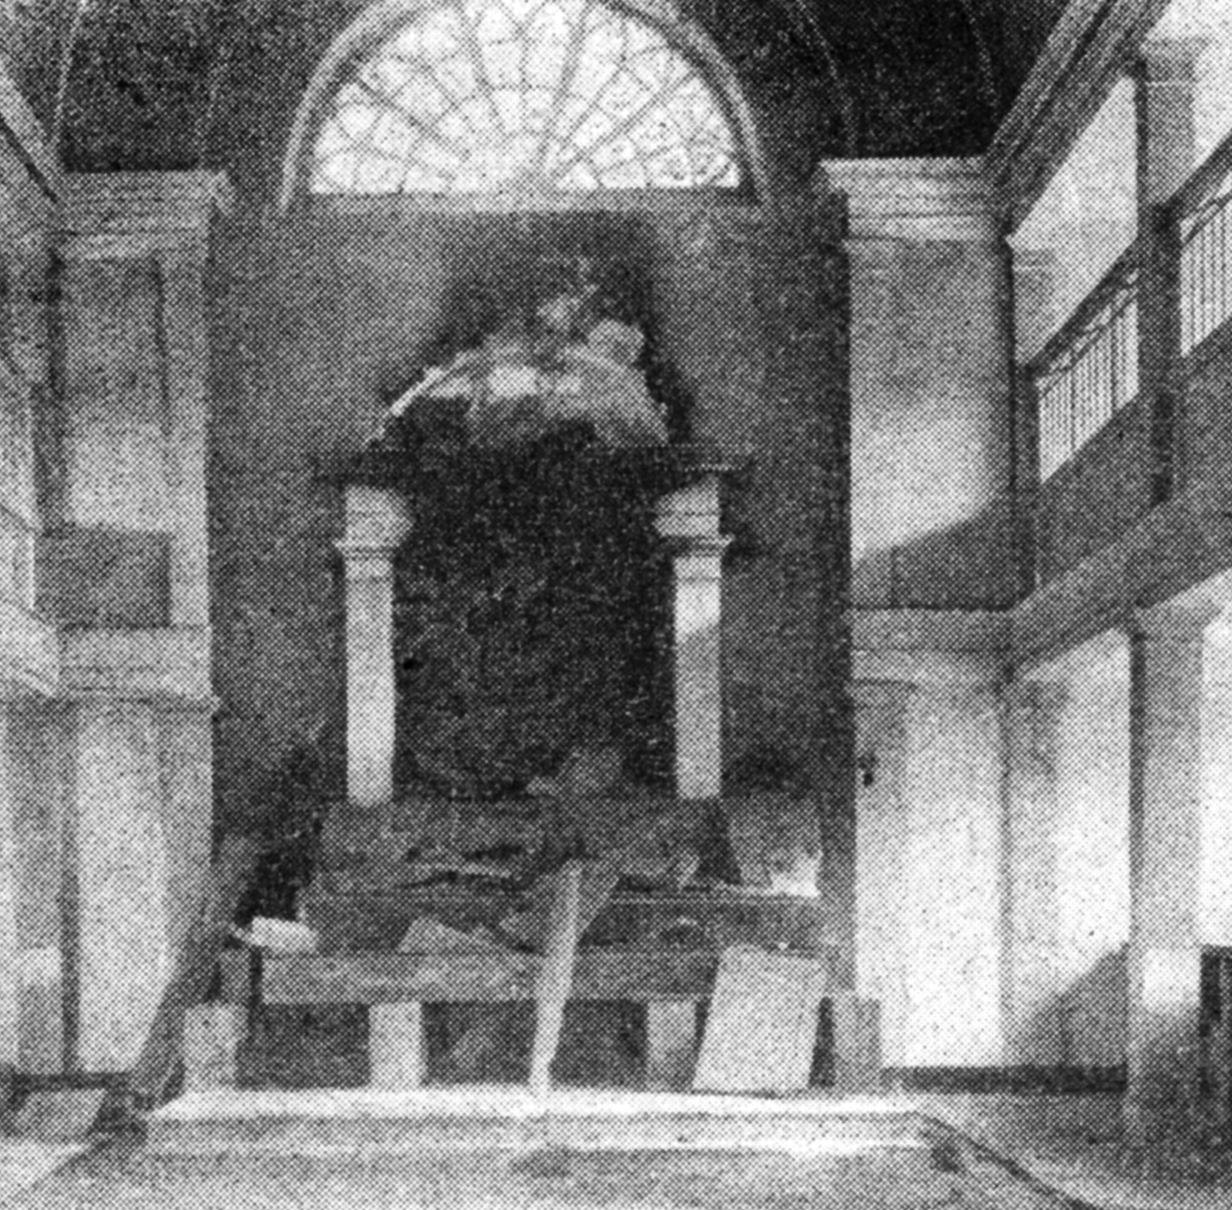 The destroyed interior of the Rexingen synagogue.